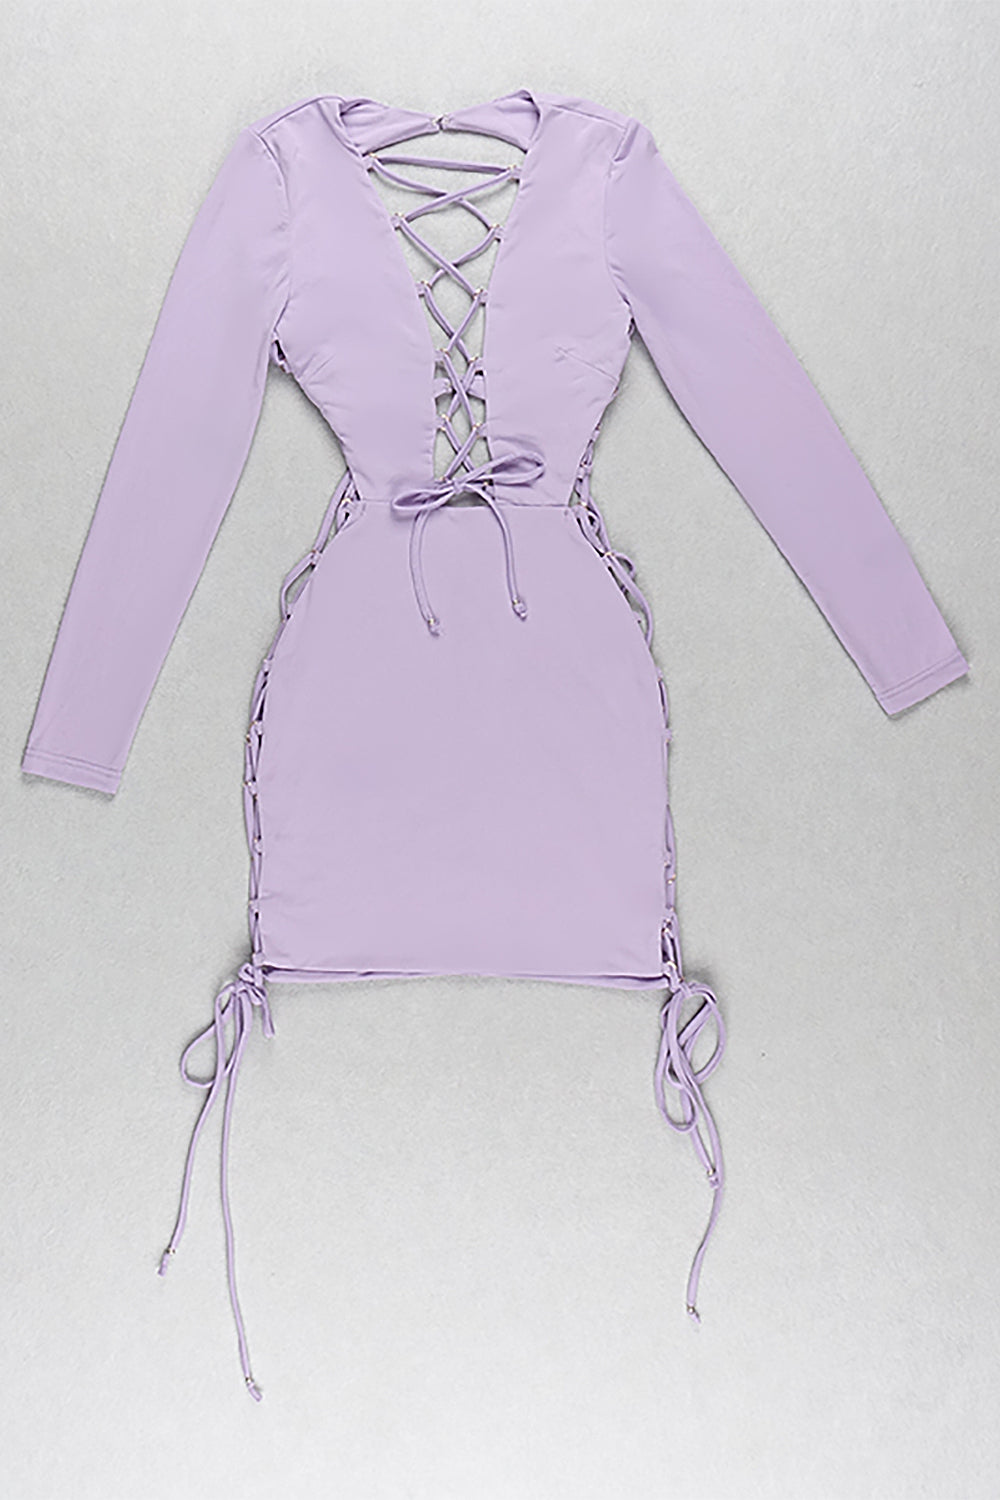 Long Sleeve Hollow out Lace Up Dresses In Black Purple - Chicida